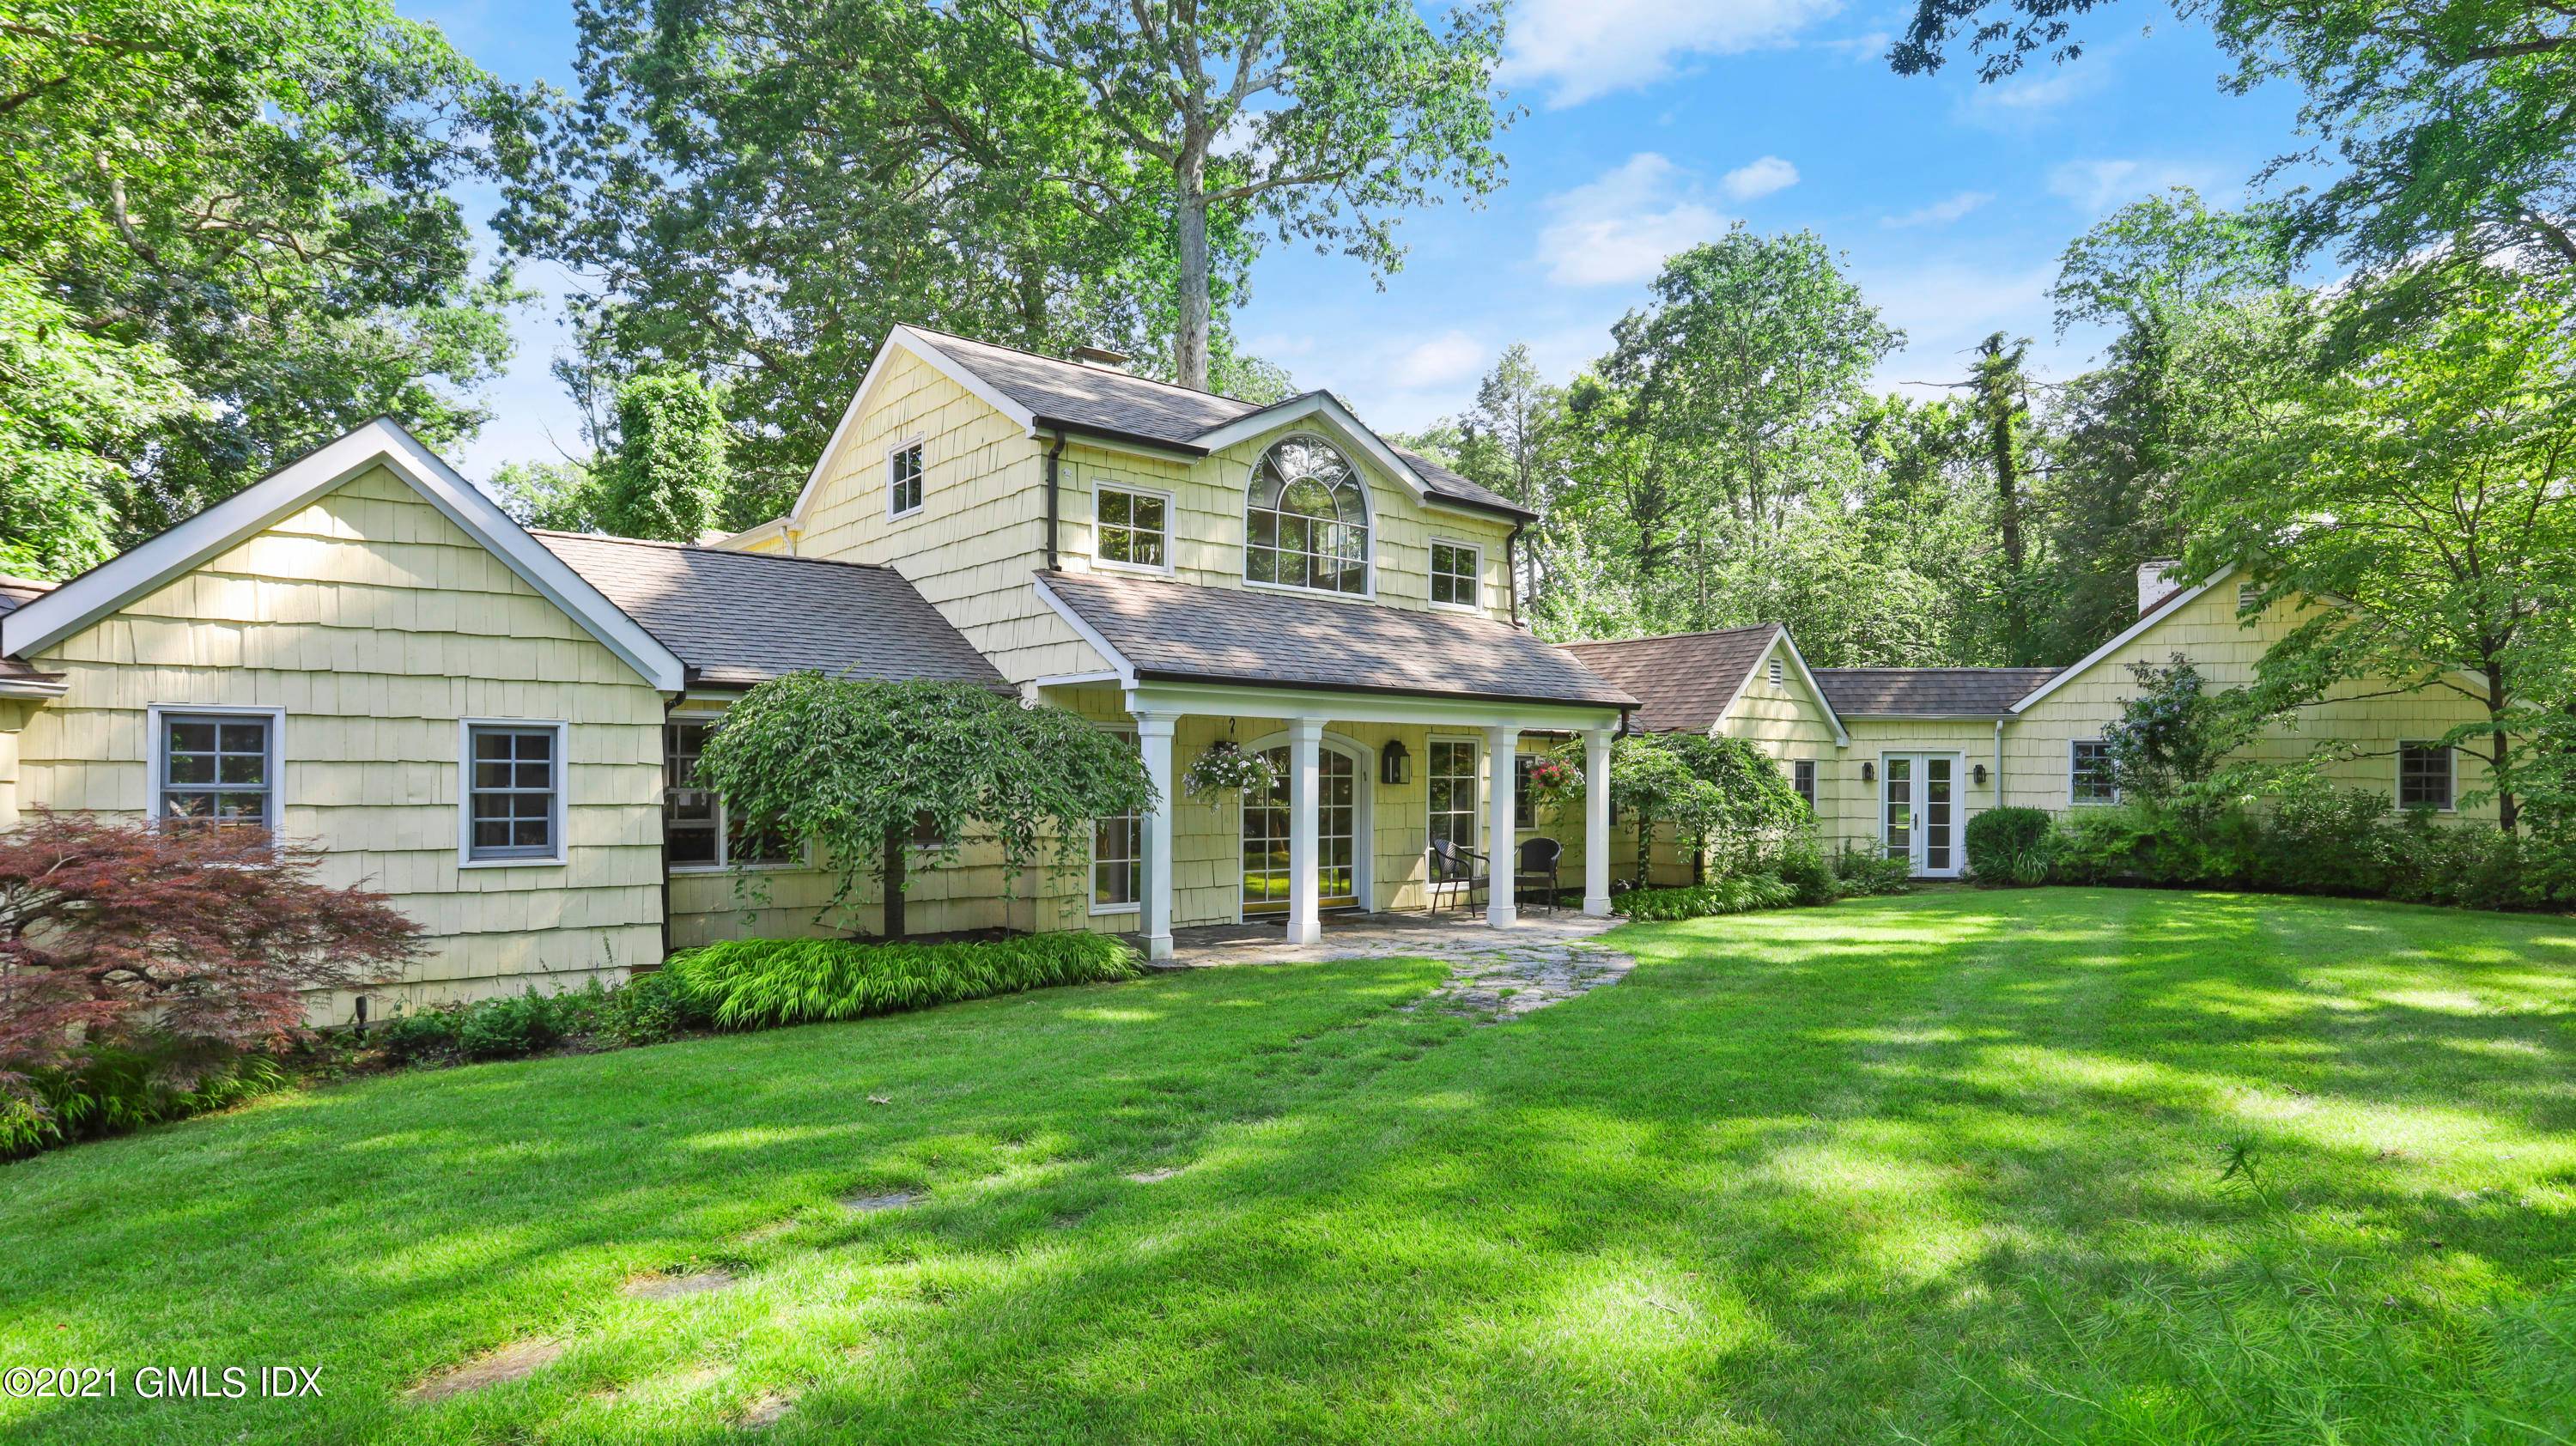 Nestled among rock outcroppings in a glen like setting with up lit, towering oaks and lush, open lawns at the end of a quiet backcountry lane is this ultimate multigenerational ...